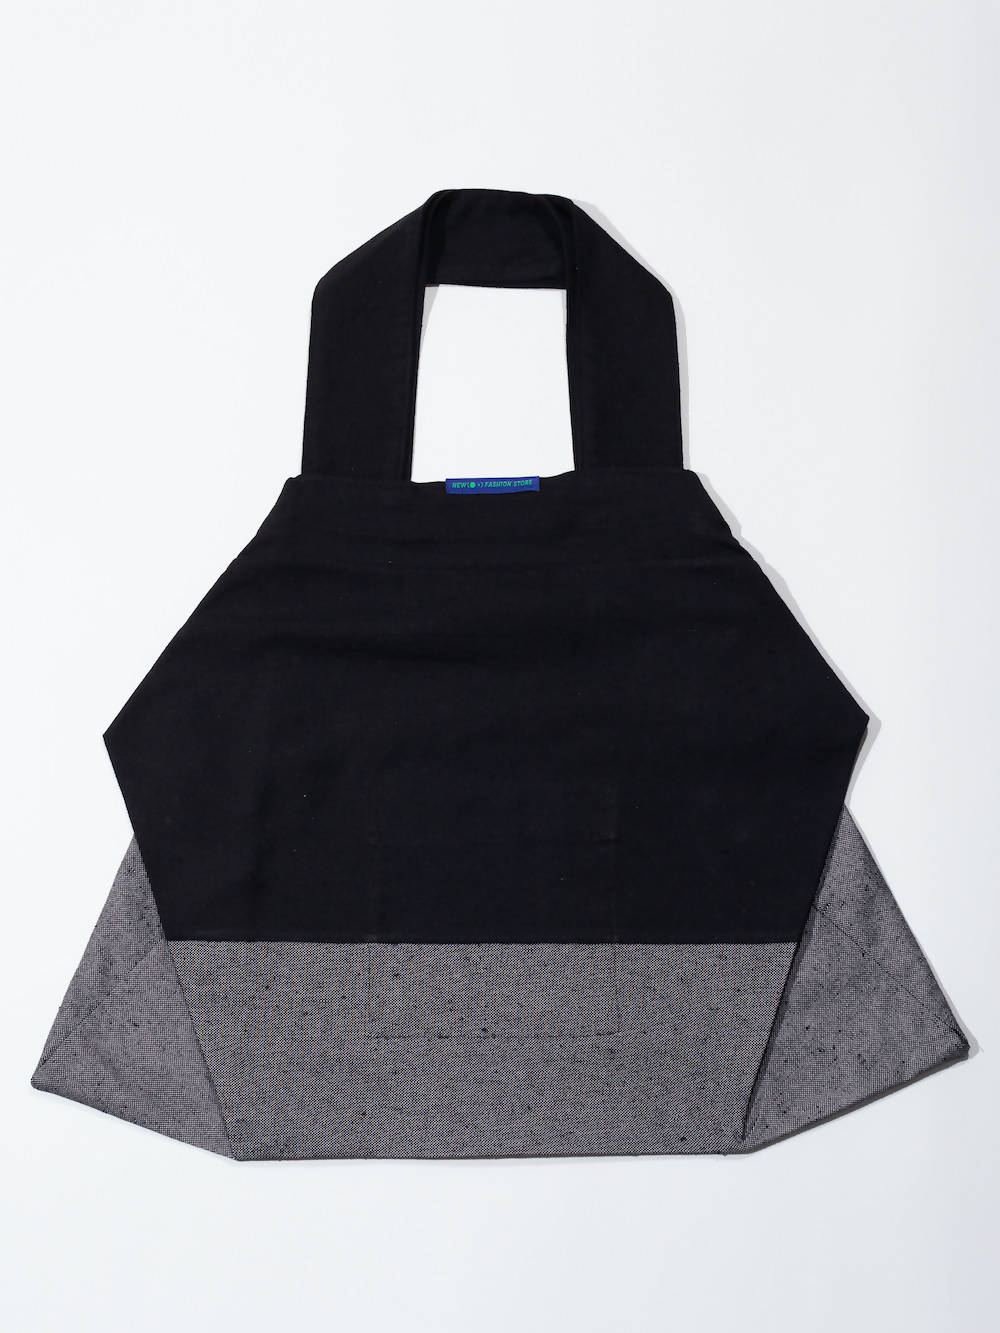 New Order Of Fashion Bag Black From Scratch Bag